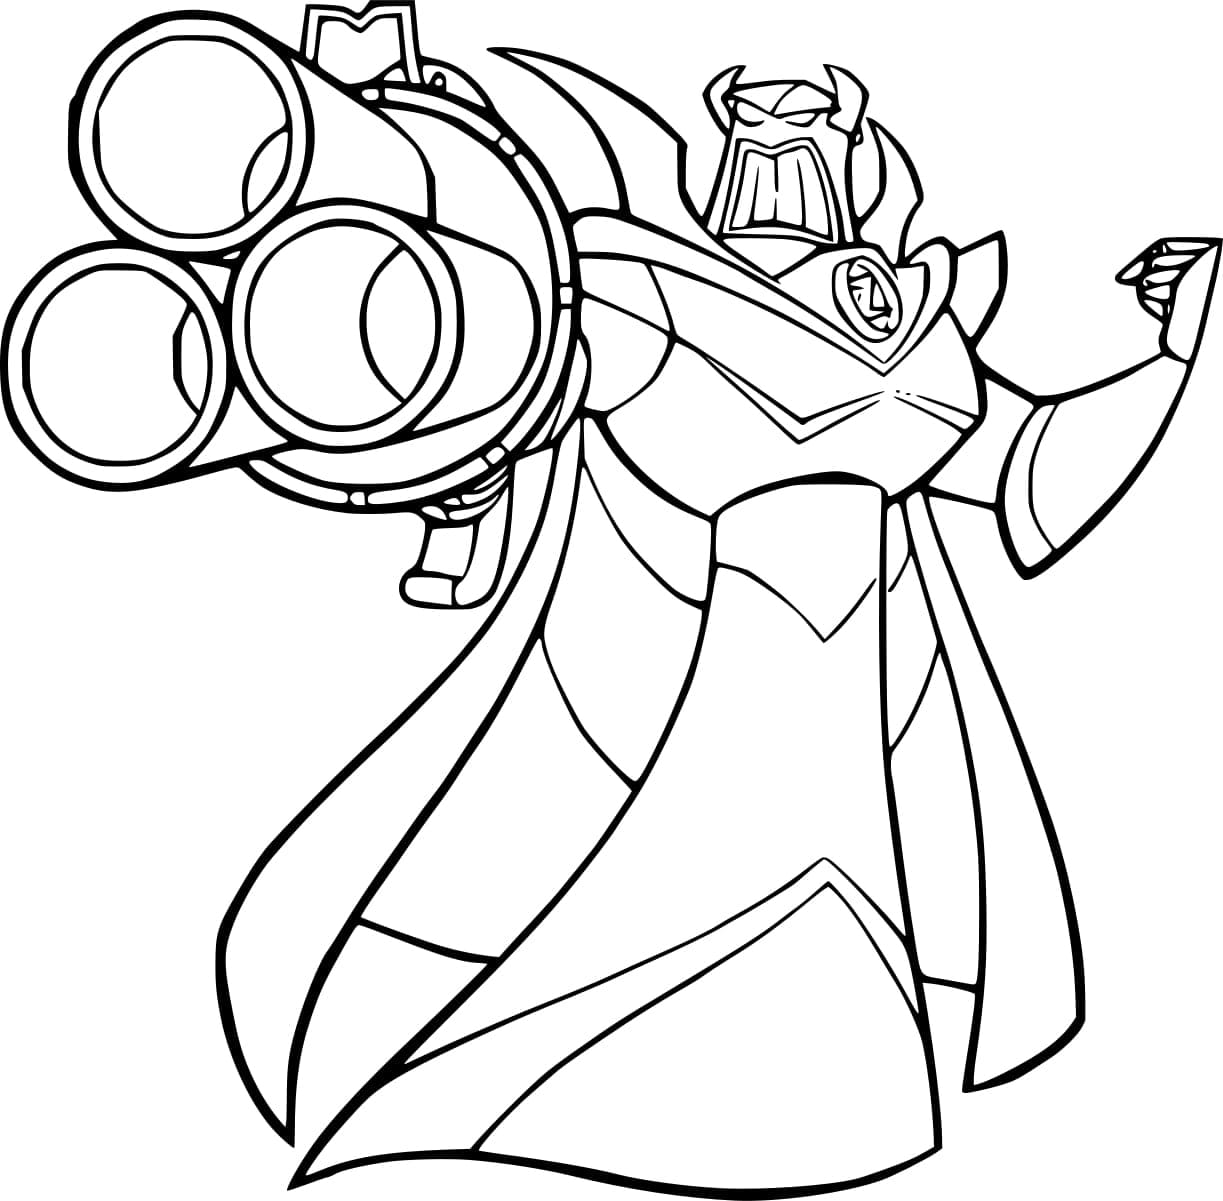 Disney Toy Story 2 Zurg coloring page - Download, Print or Color Online ...